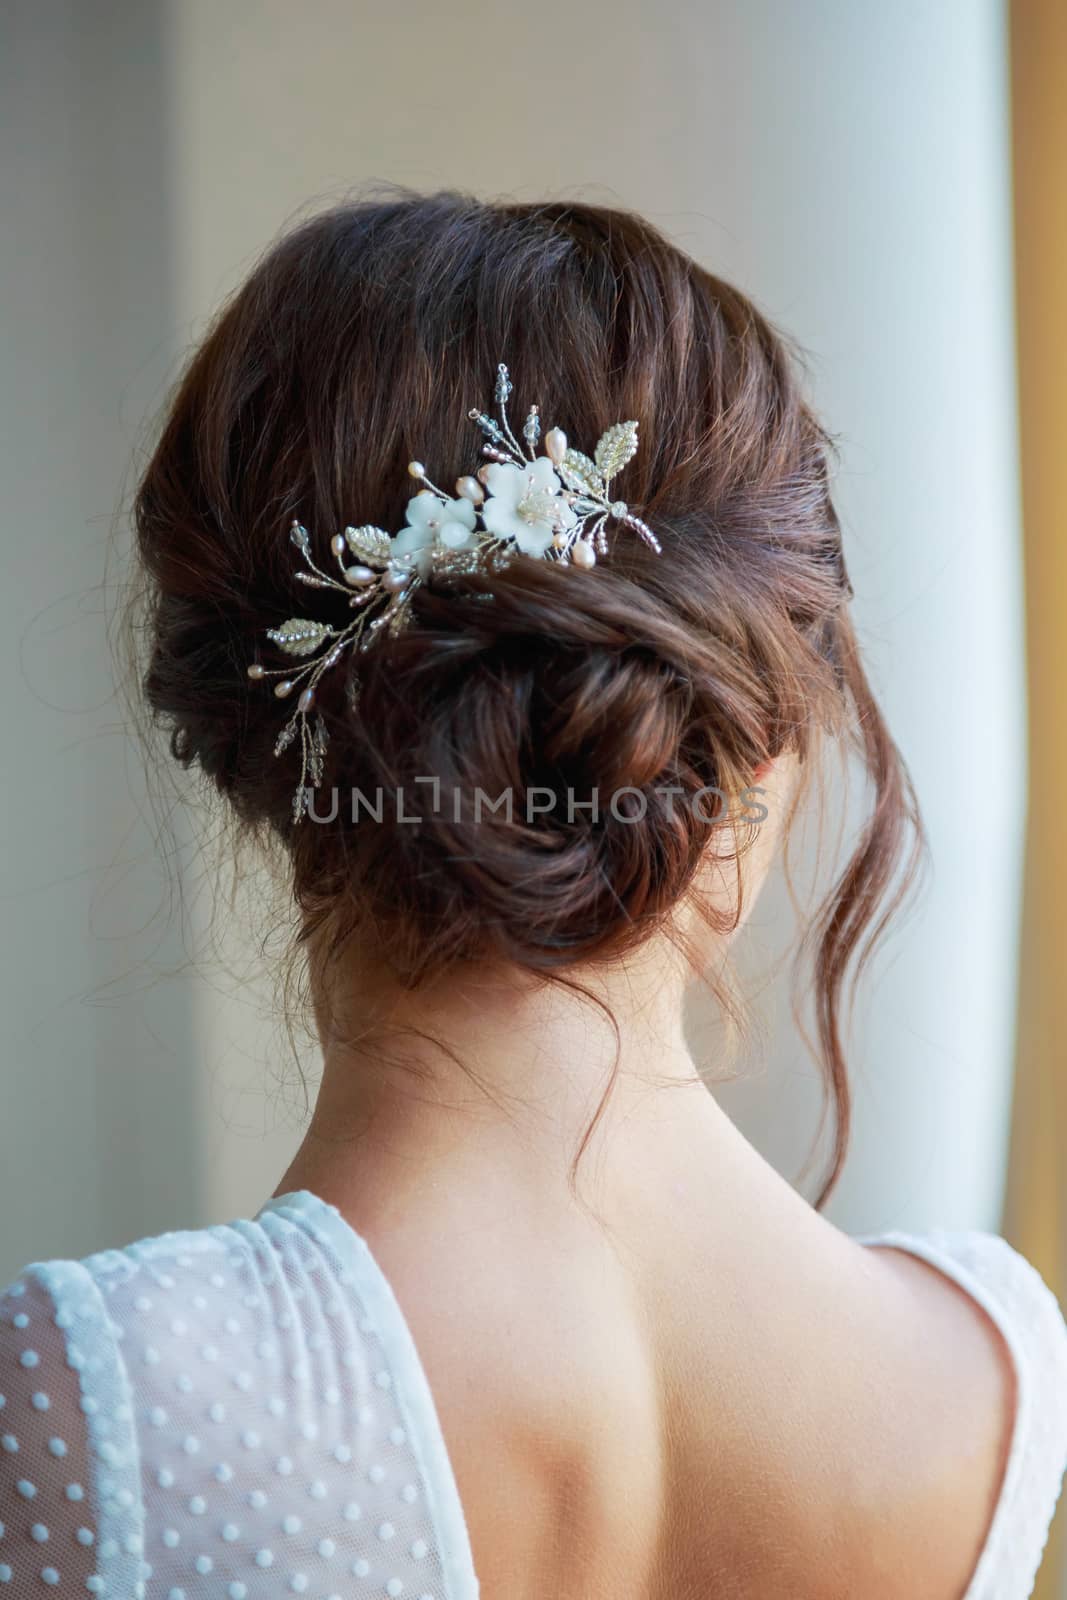 Close-up of a beautyful wedding hairstyle with hair decoration.